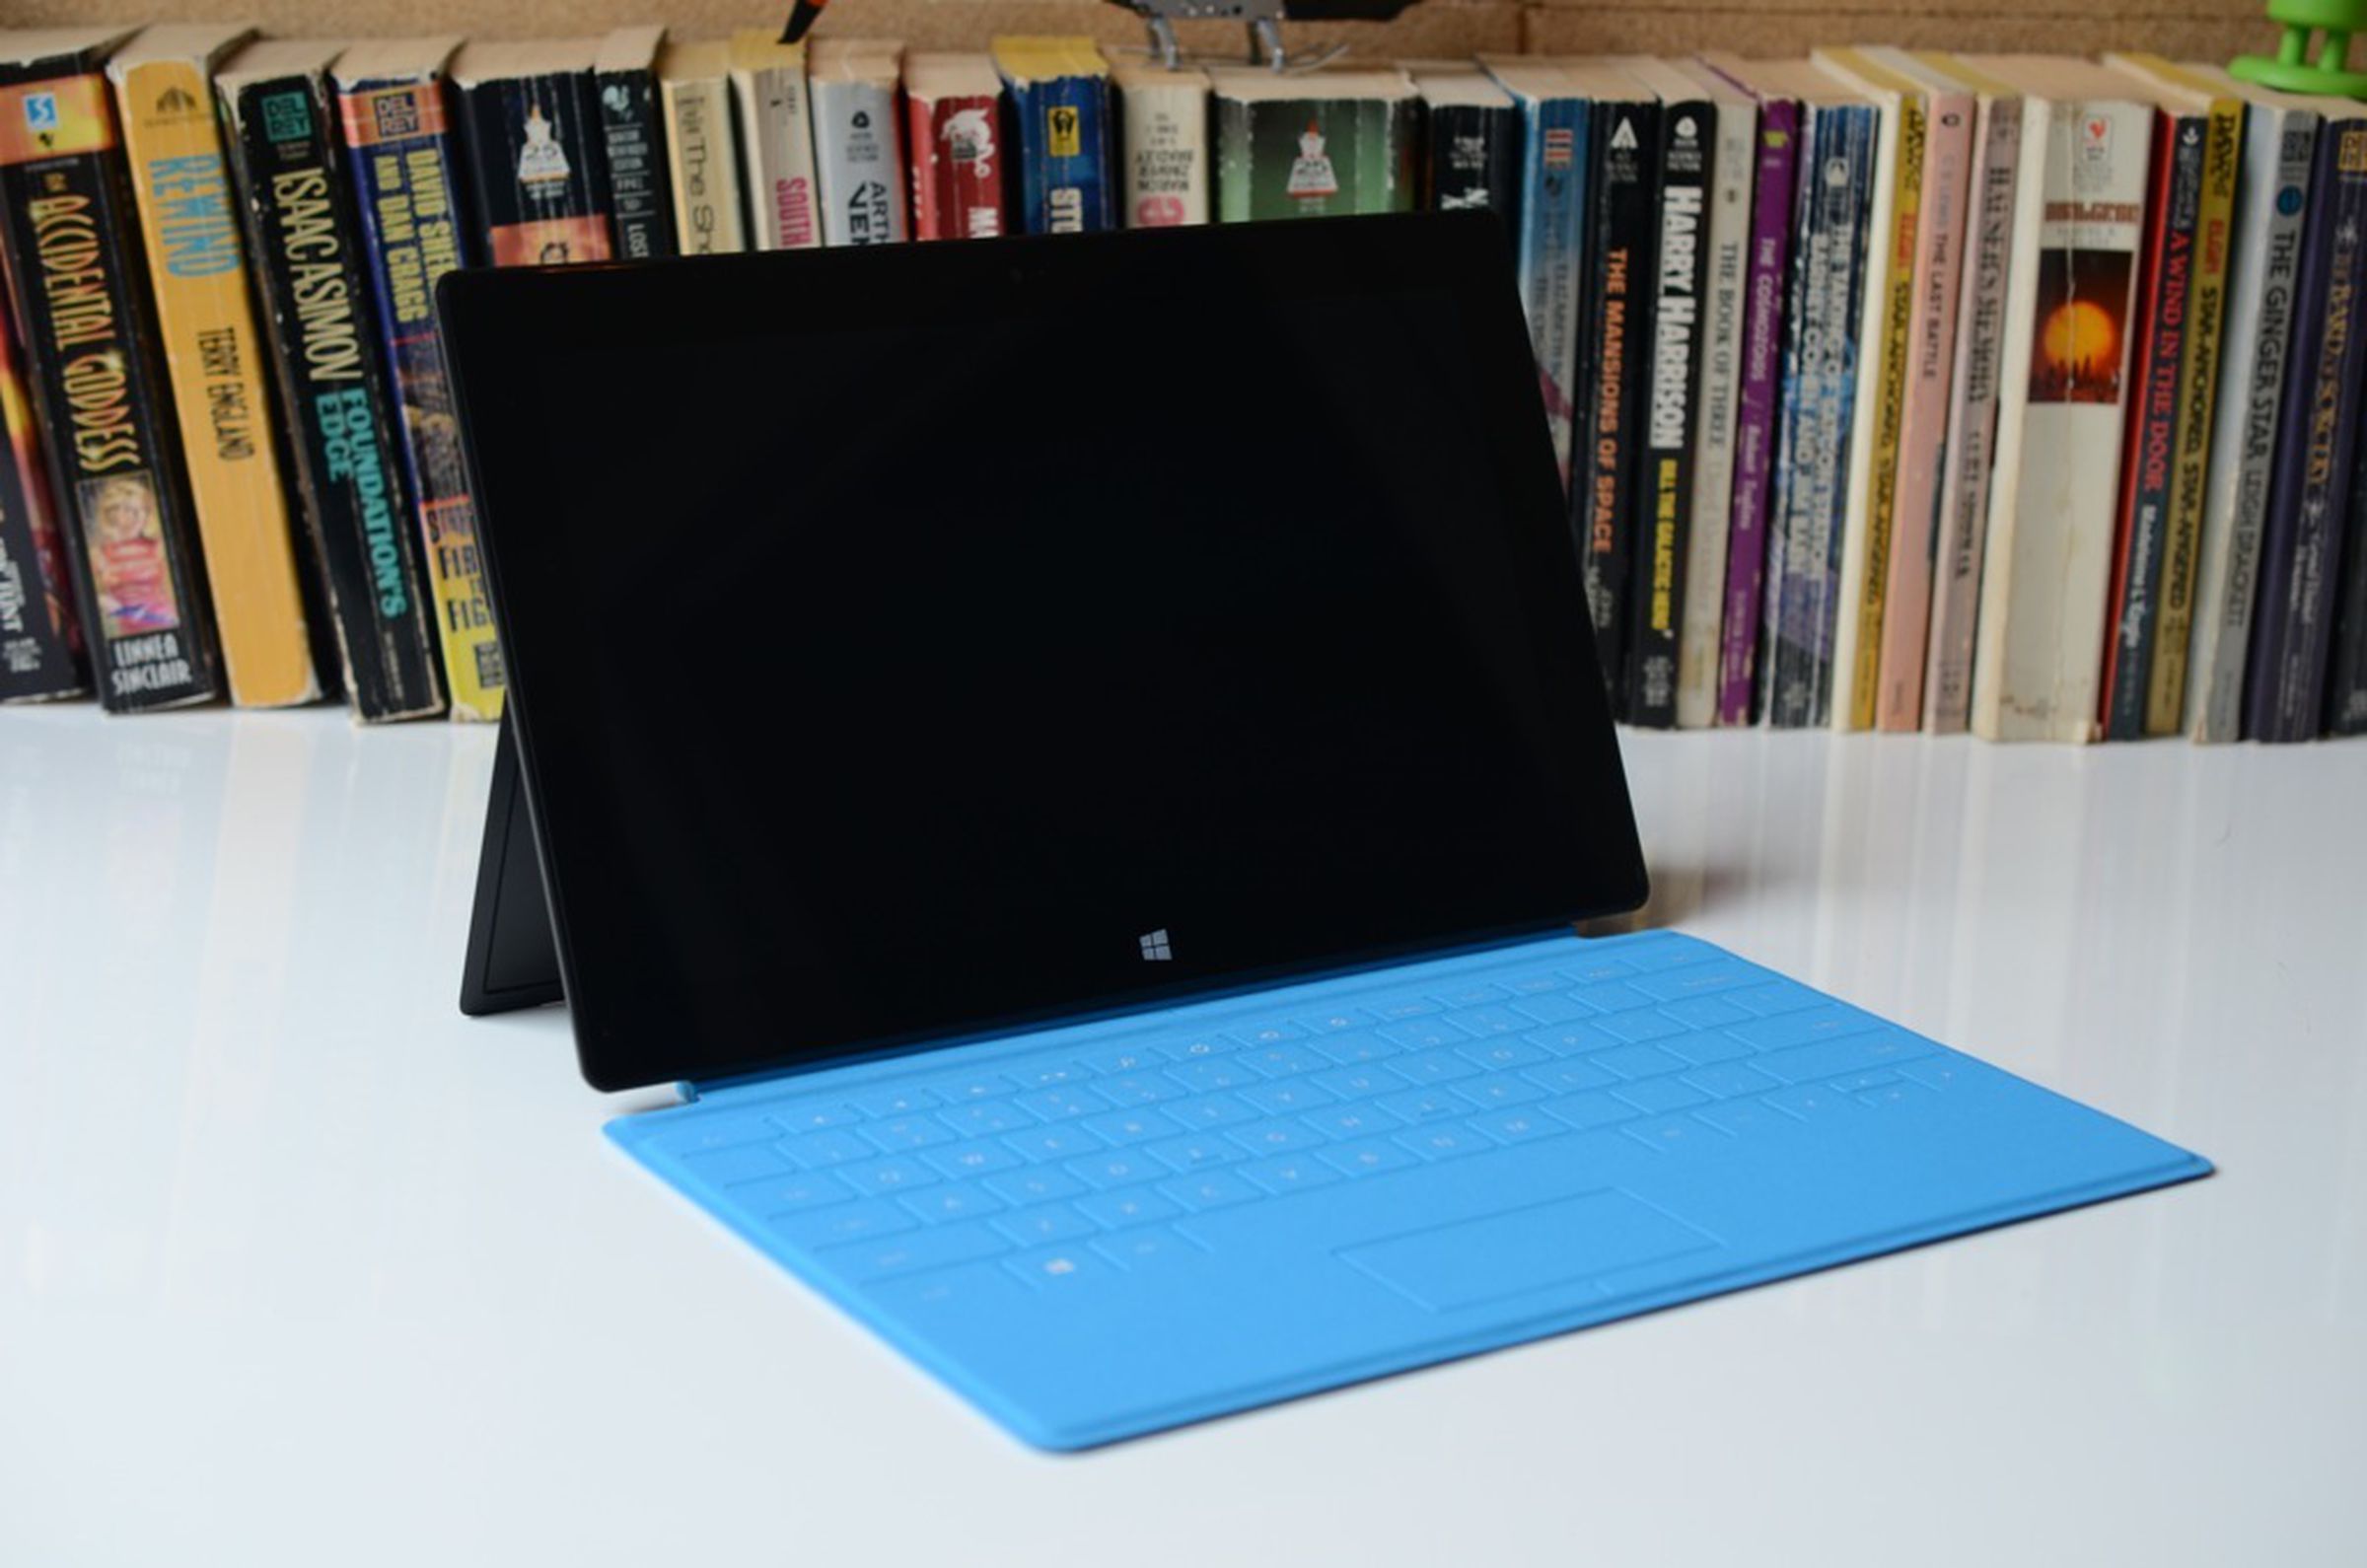 Microsoft Surface RT pictures